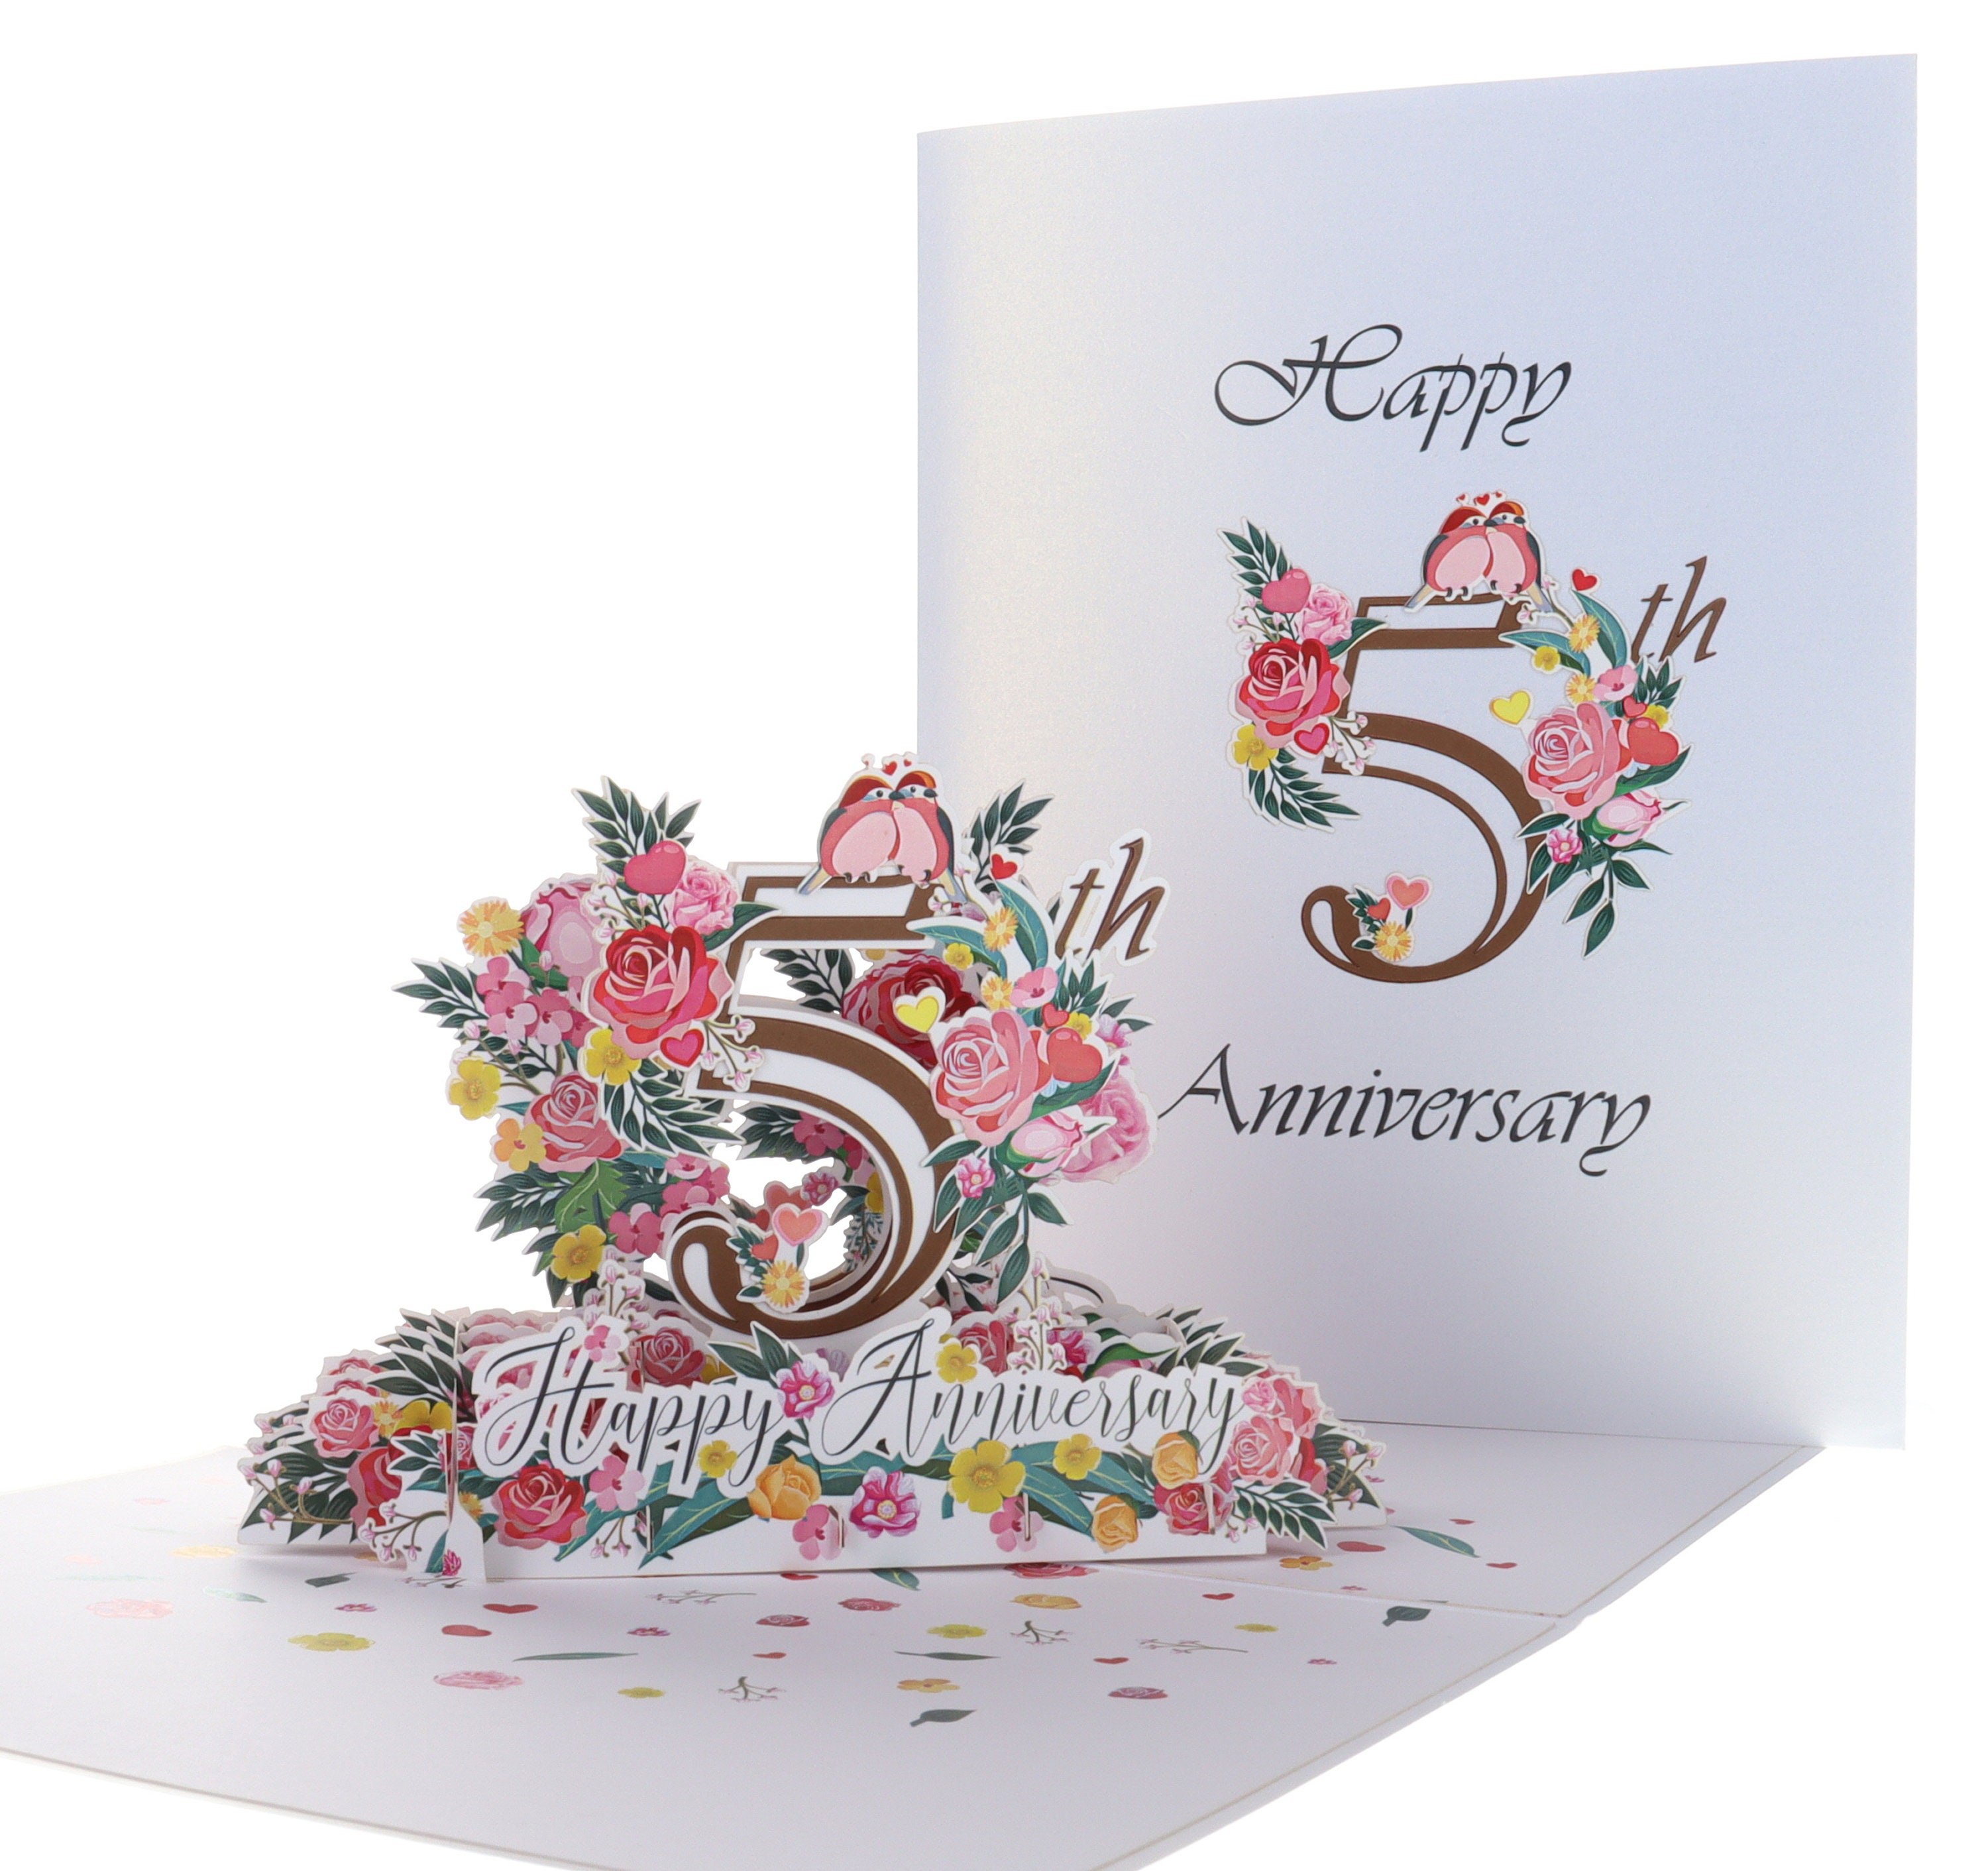 iGifts and Cards Unique Happy Anniversary Las Vegas 3D Pop Up Greeting Card - Cute Couple, Special Occasion, Congratulations, Celebration, Wedding